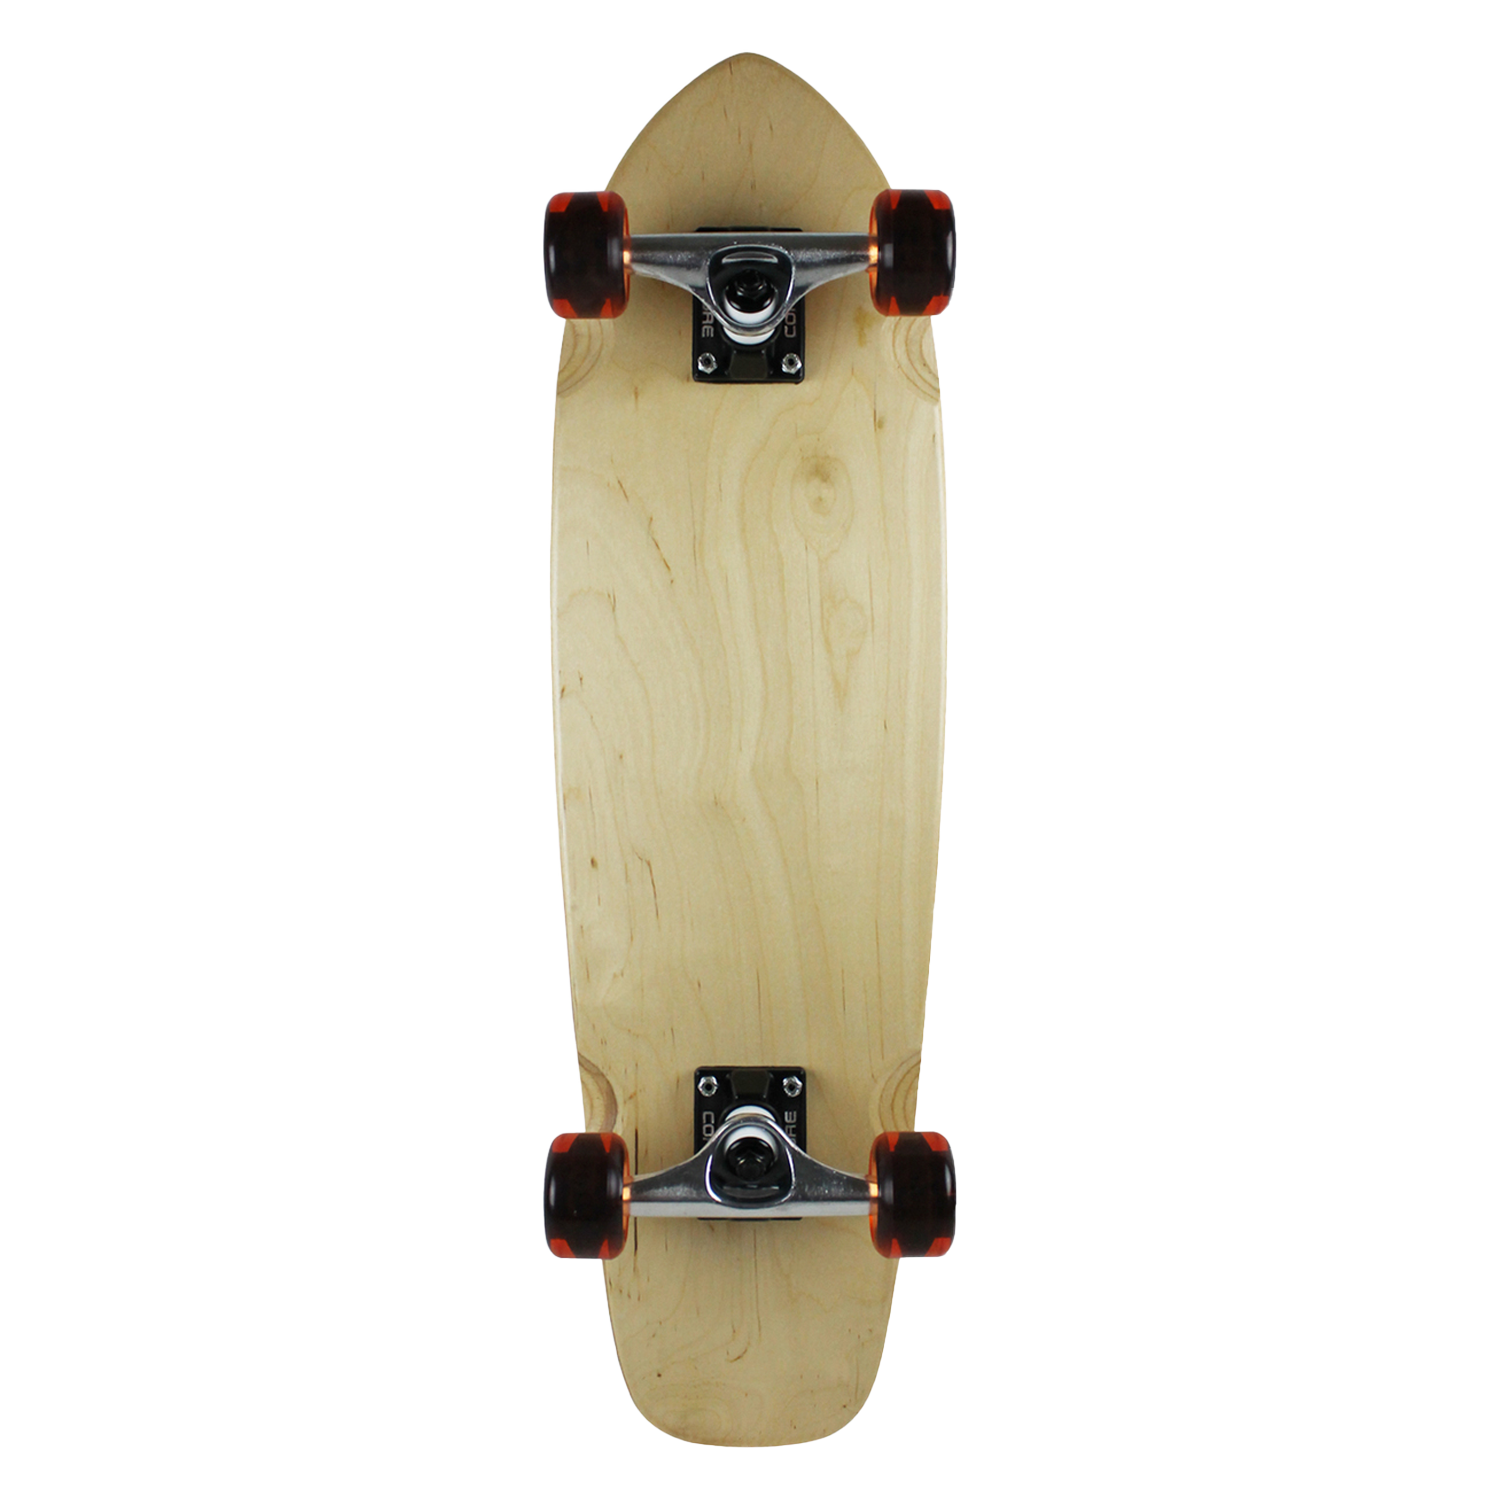 Moose Skateboard Cruiser Complete 7 Ply North American Maple Natural 7in x 28.71in